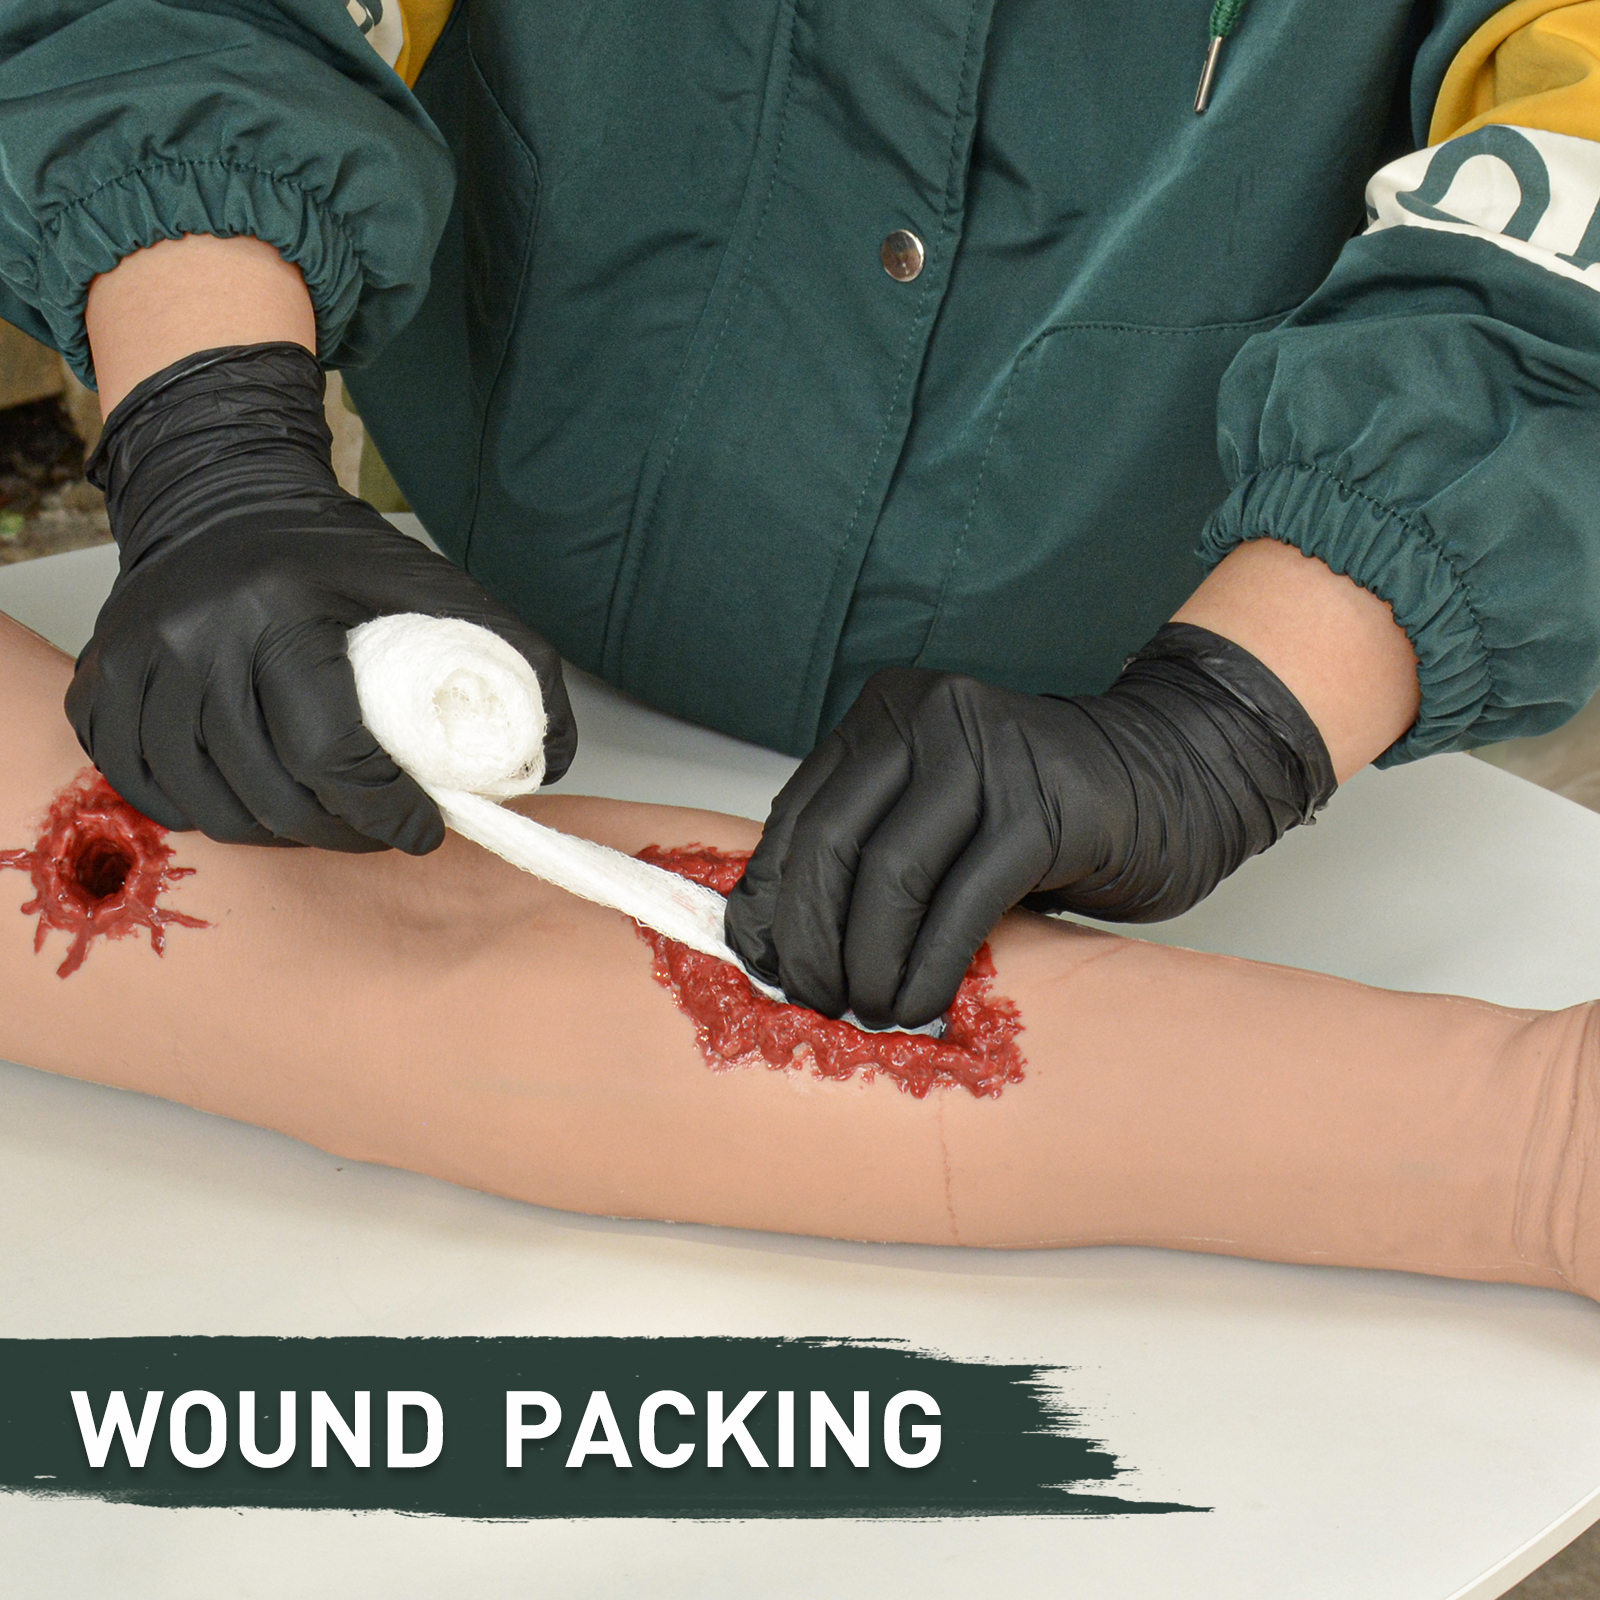 Haemorrhage Control Arm for Wound Packing Training